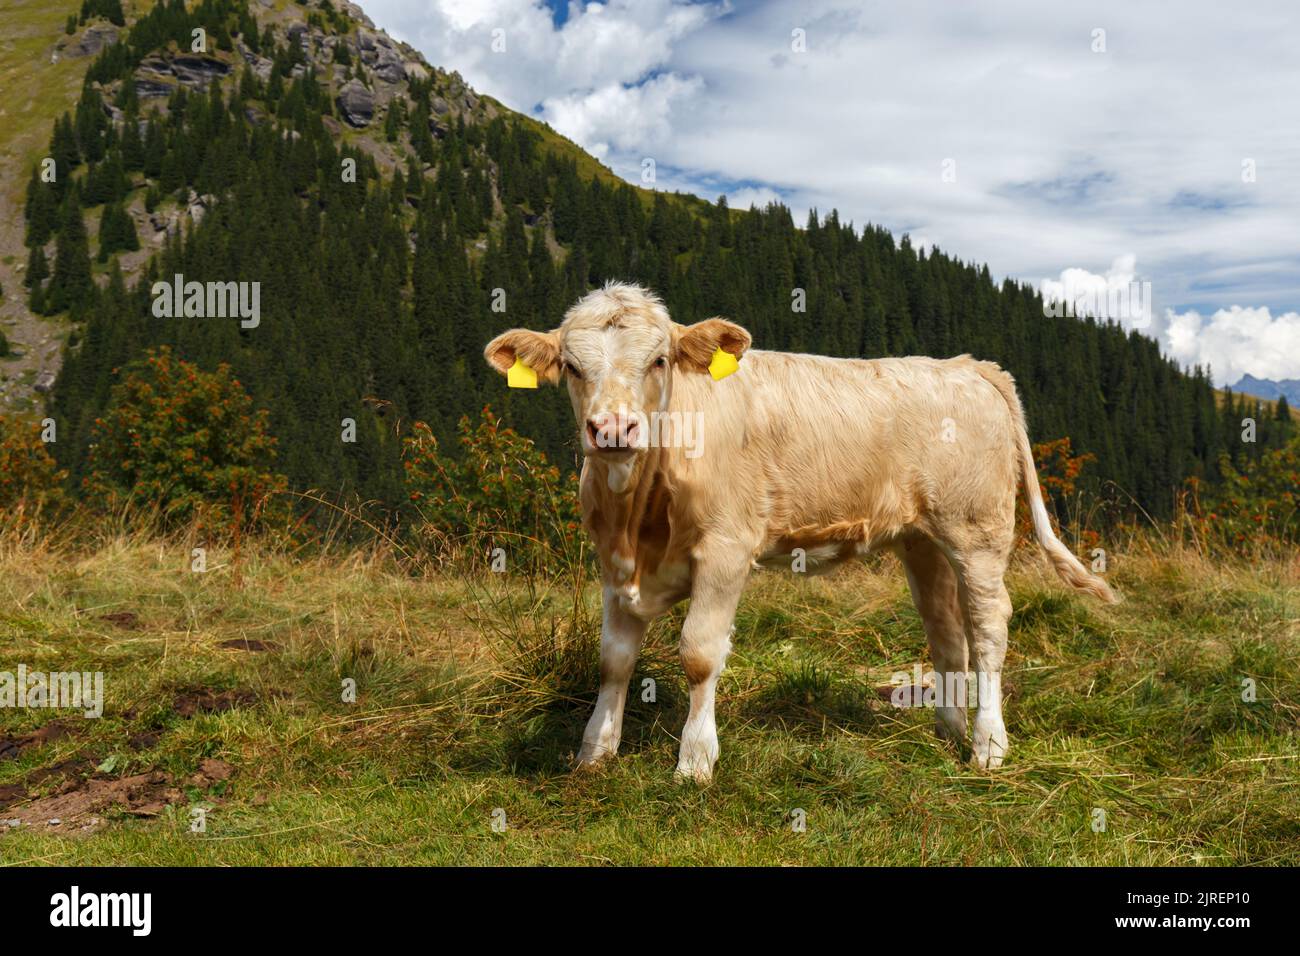 Cow in Grindelwald of Swiss Alps, beautiful view in Switzerland Stock Photo